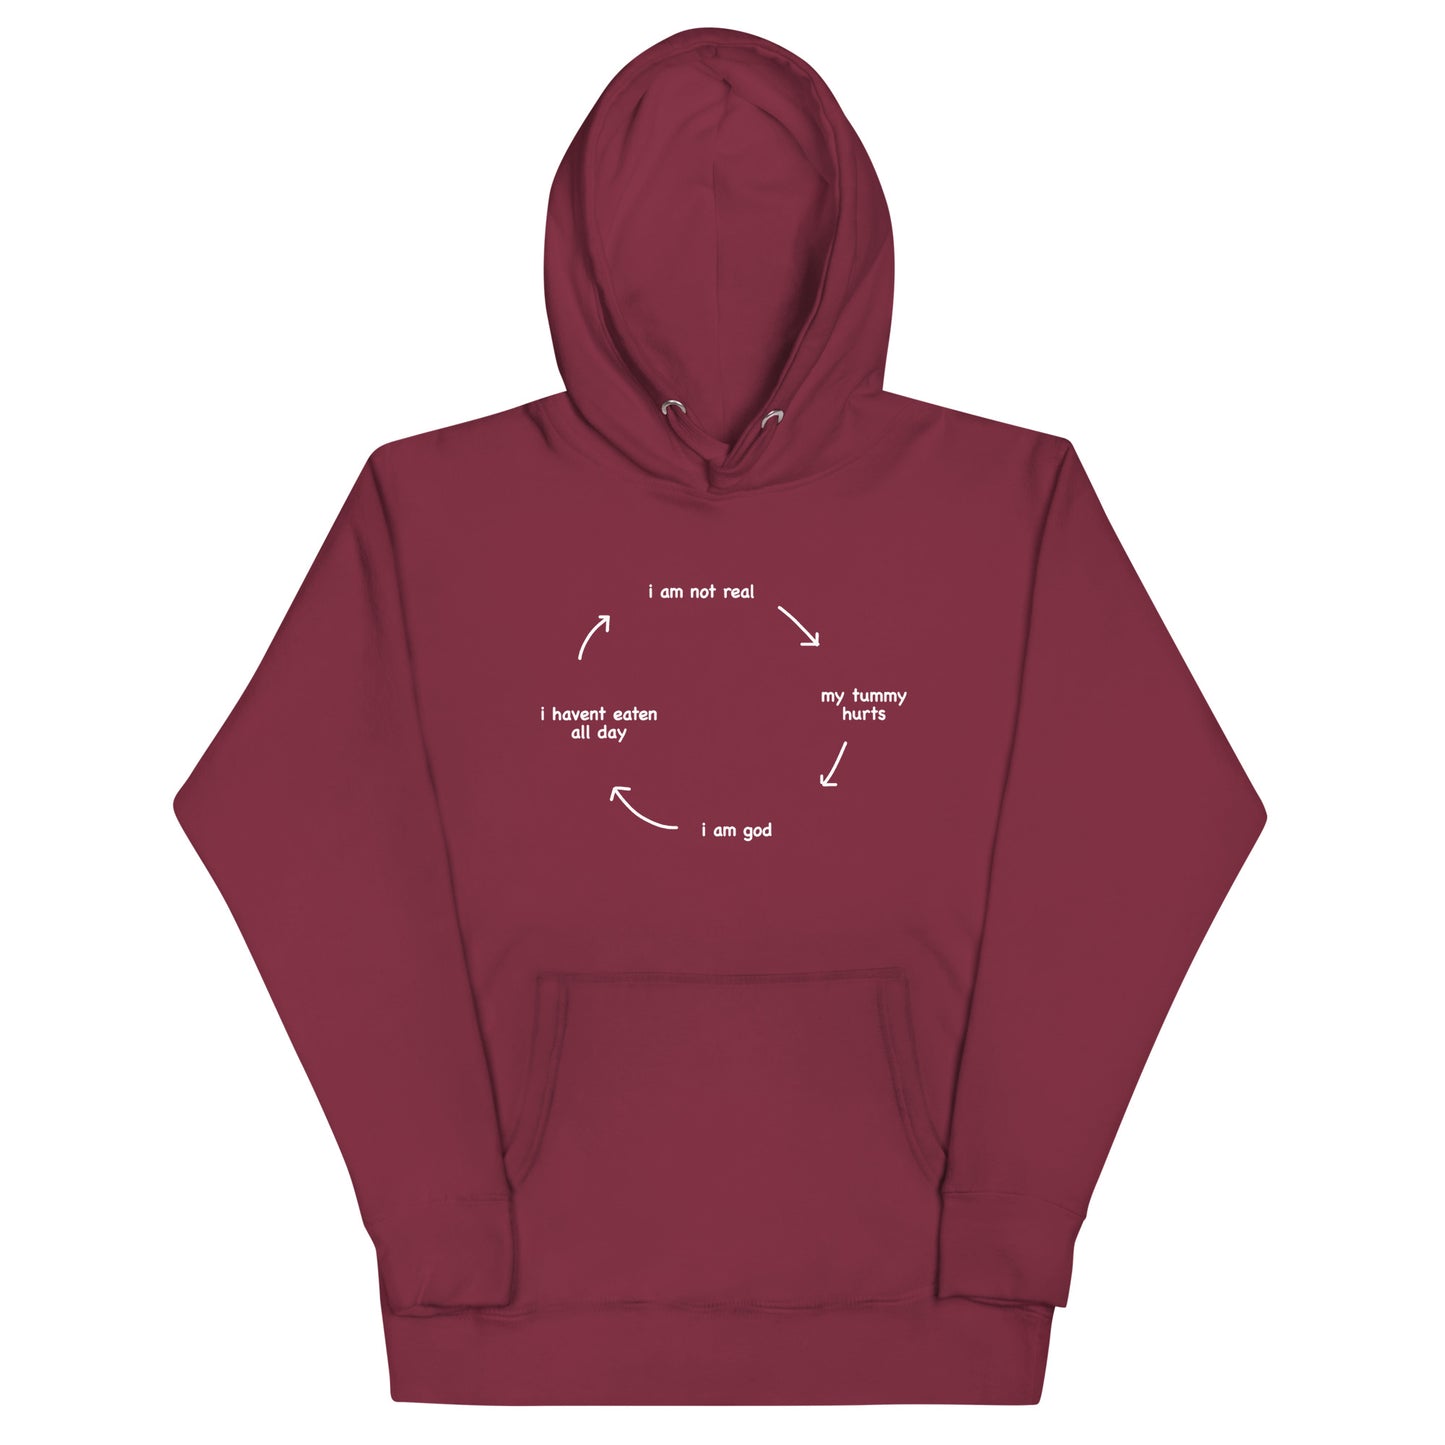 Life's Daily Cycle Unisex Hoodie